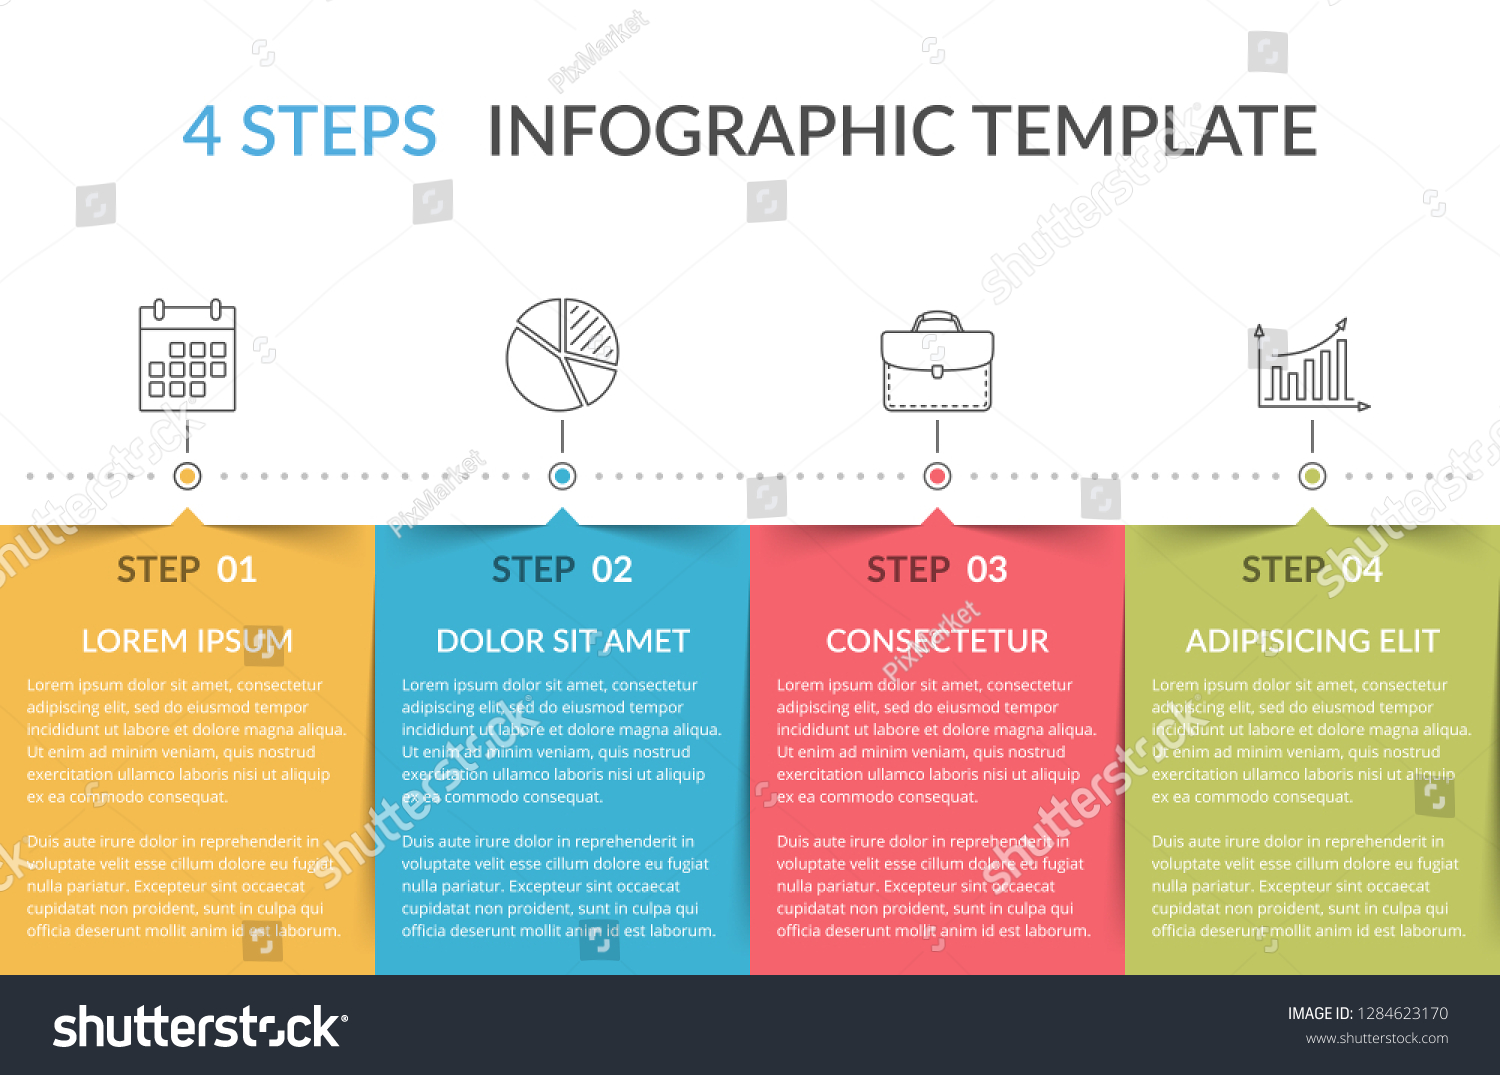 Infographic Template 4 Steps Workflow Process Stock Vector Royalty Free 1284623170 Shutterstock 4073